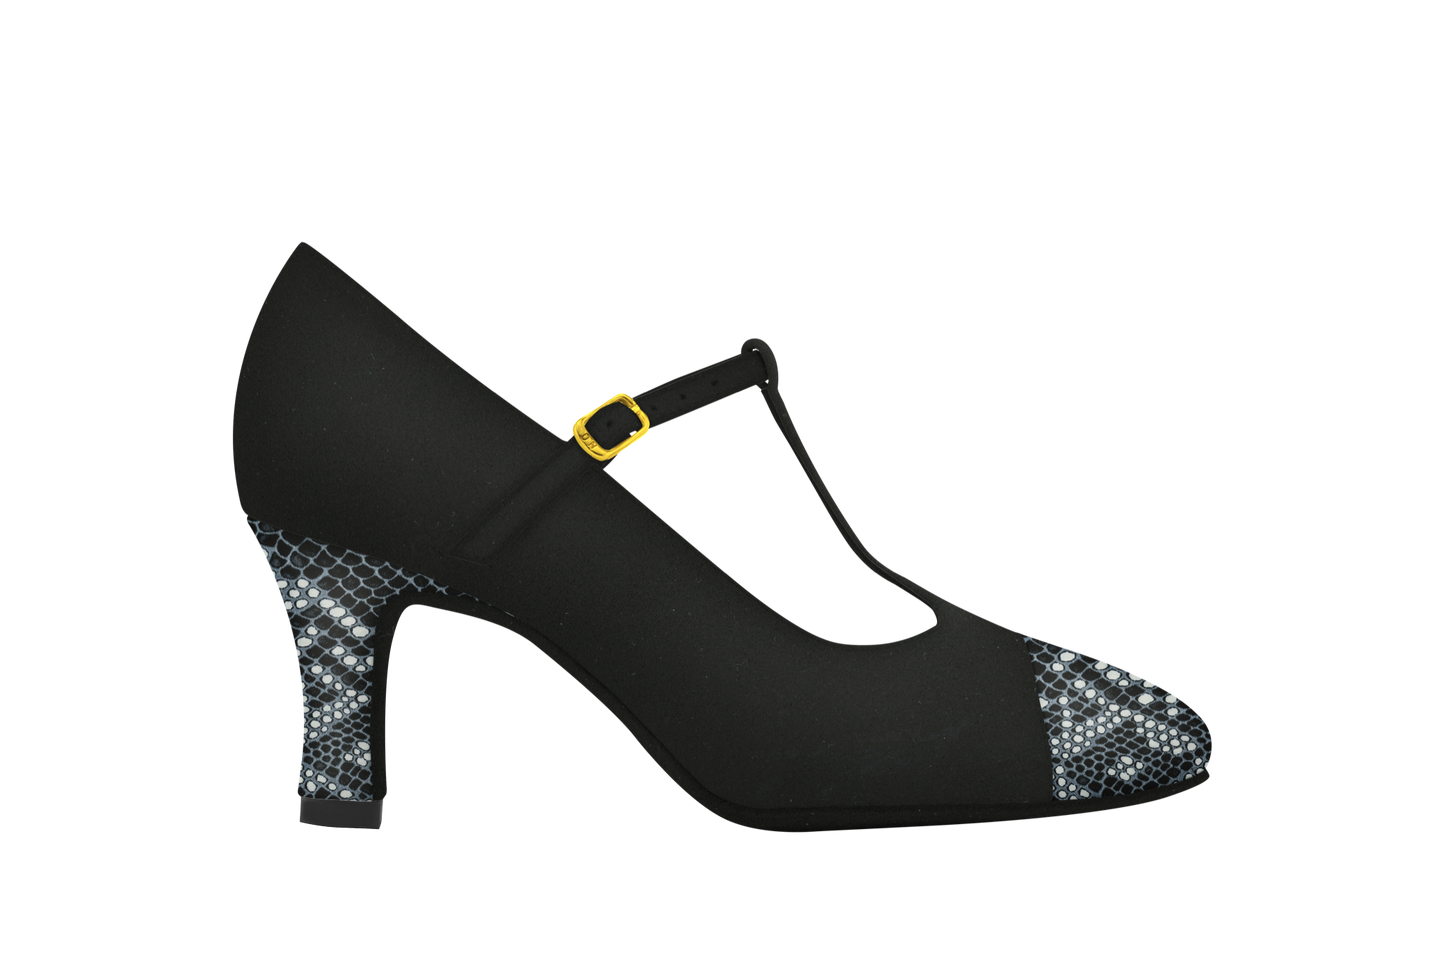 Dance Naturals 732 Carnevale Black and White Printed Python/Black Suede Ballroom Dance Shoe with Rounded Toe and T-Strap